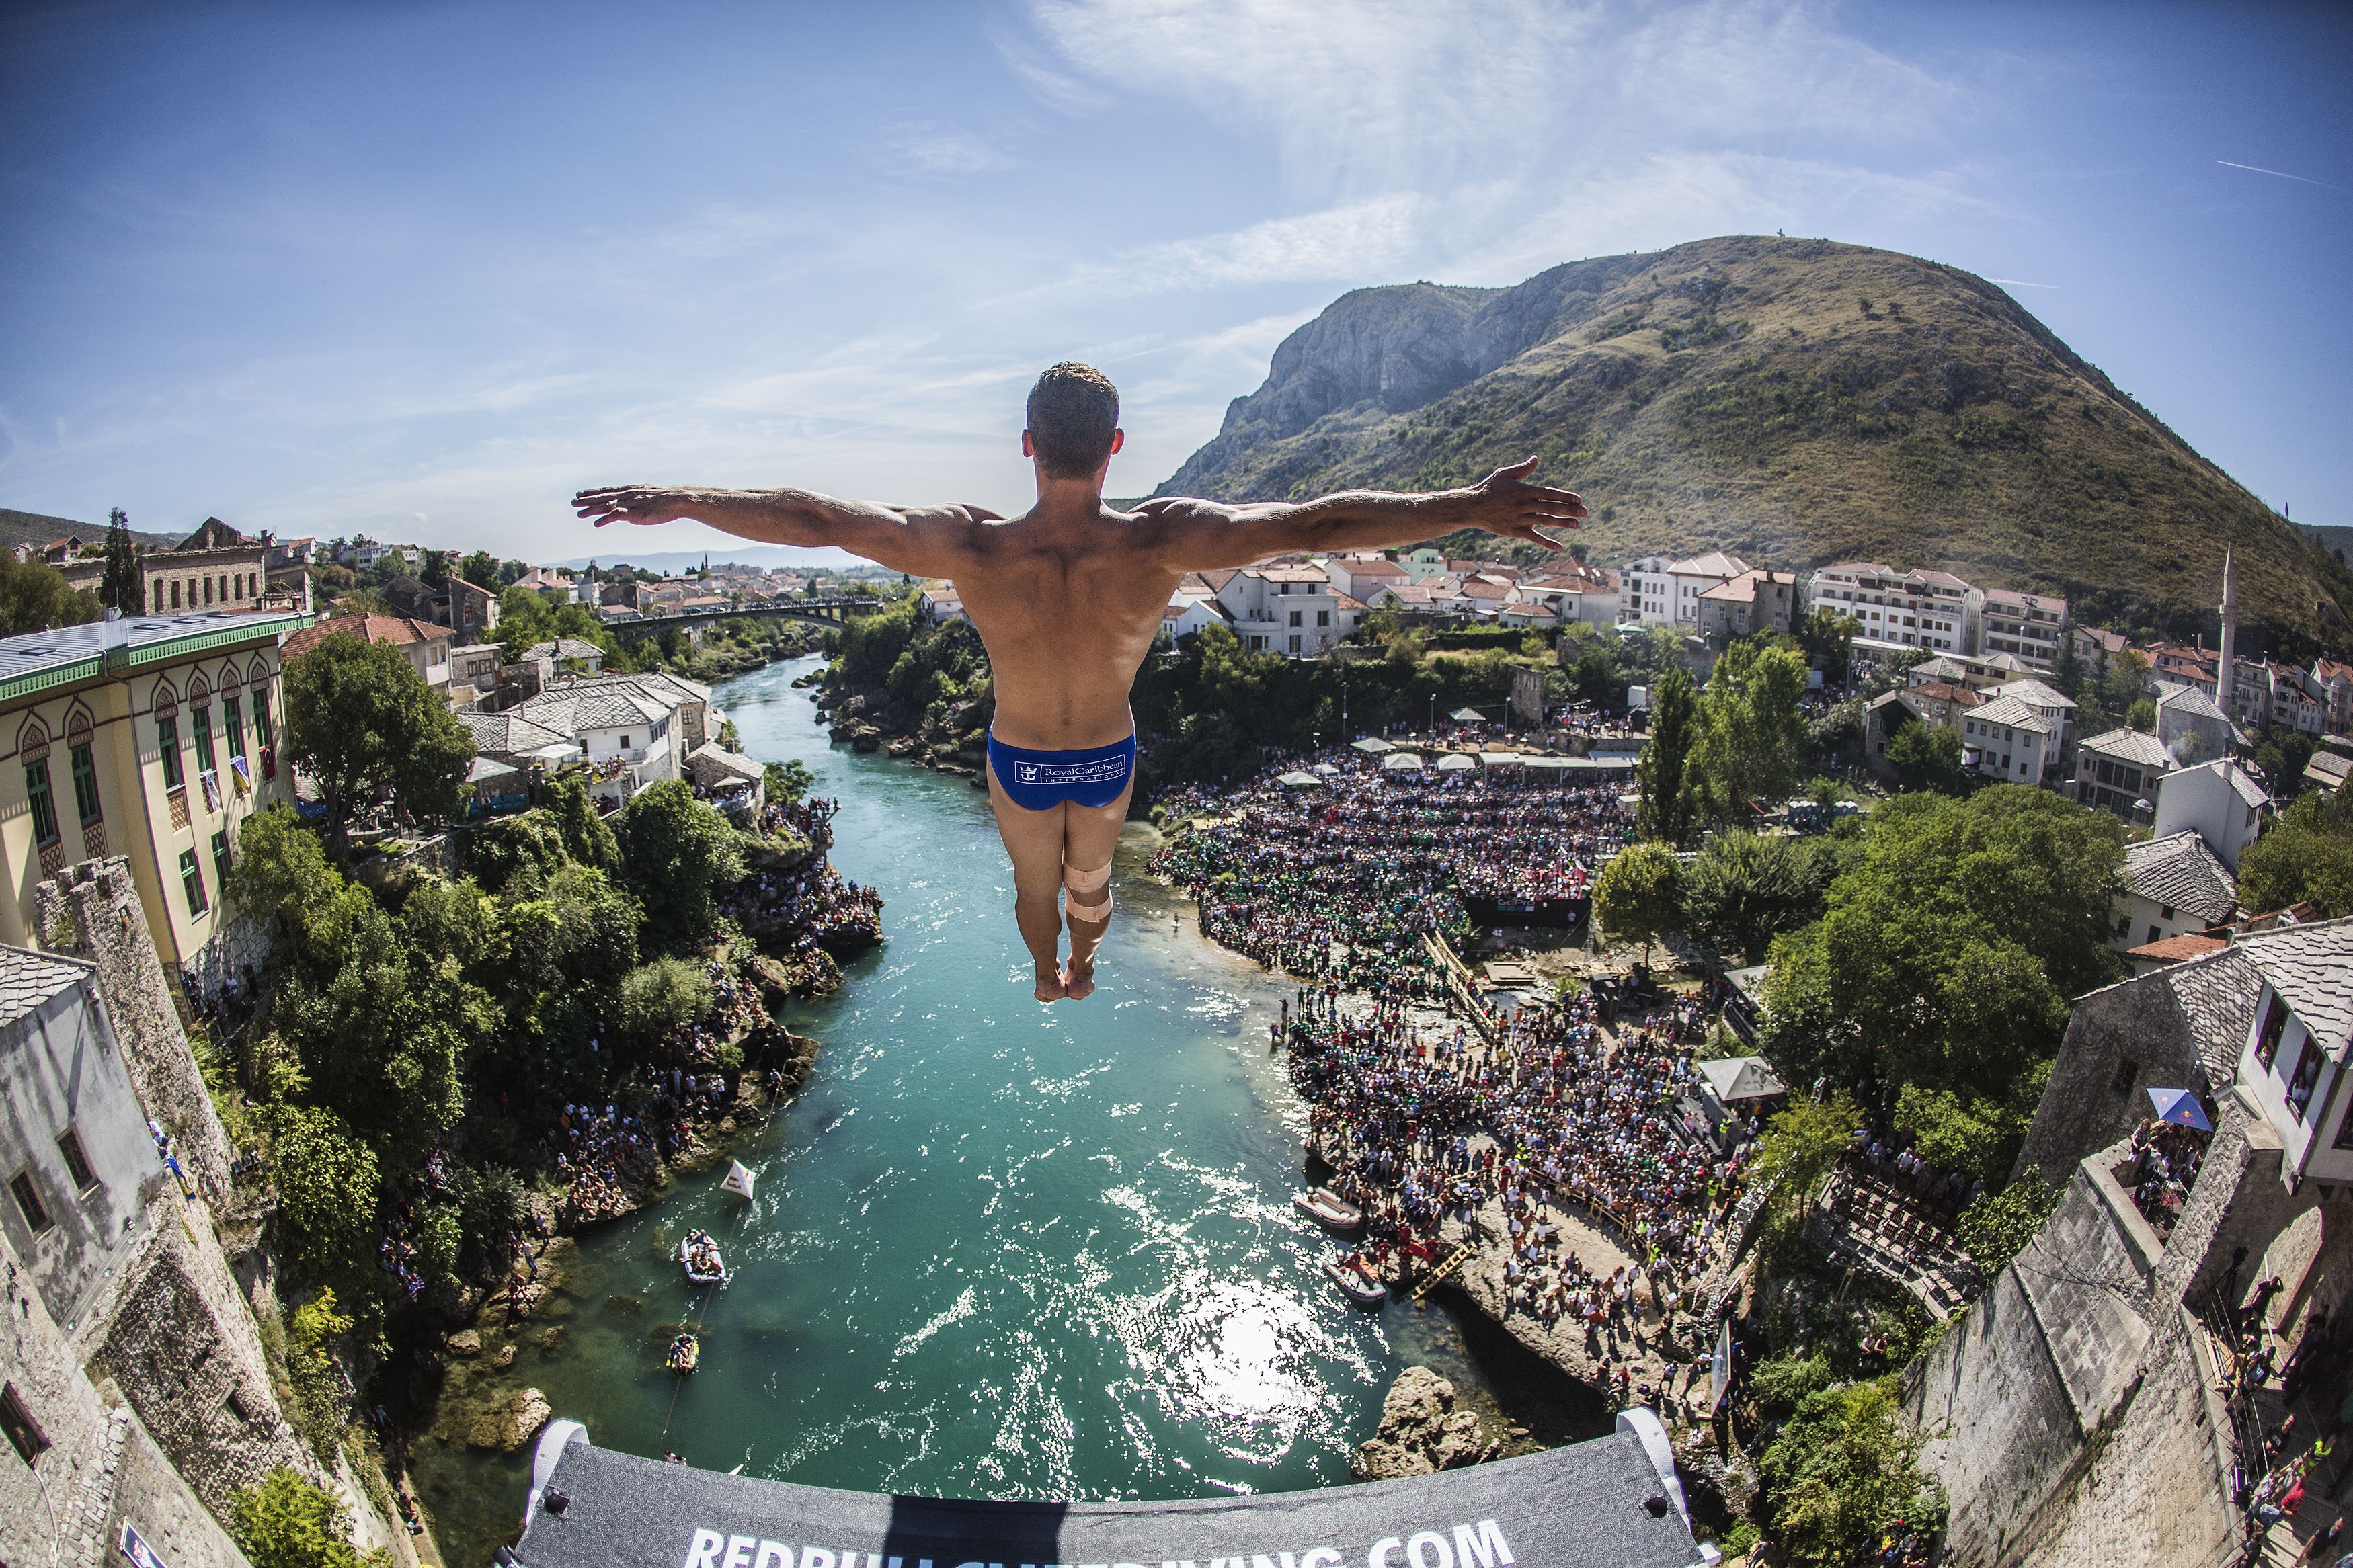 Red Bull Cliff Diving in Mostar on 15th and 16th of September visitbih.ba